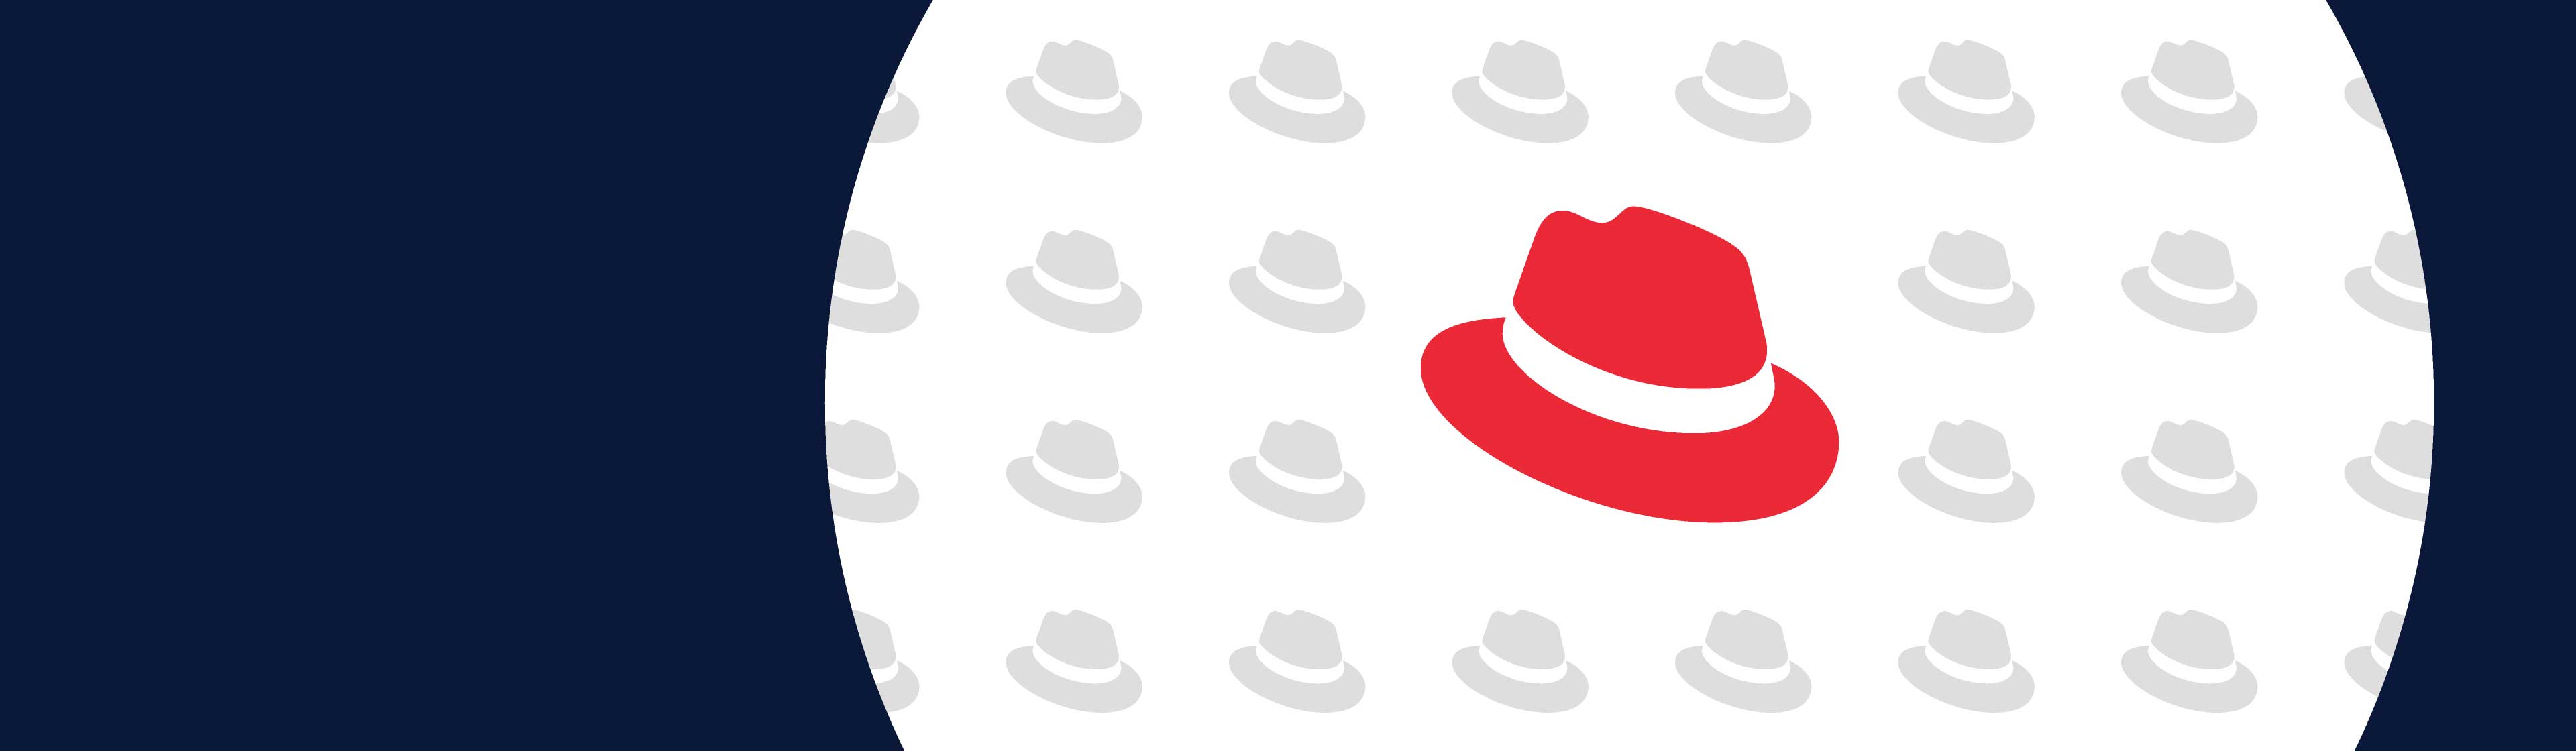 A large Red Hat symbol surrounded by grey Red hat symbols in a pattern